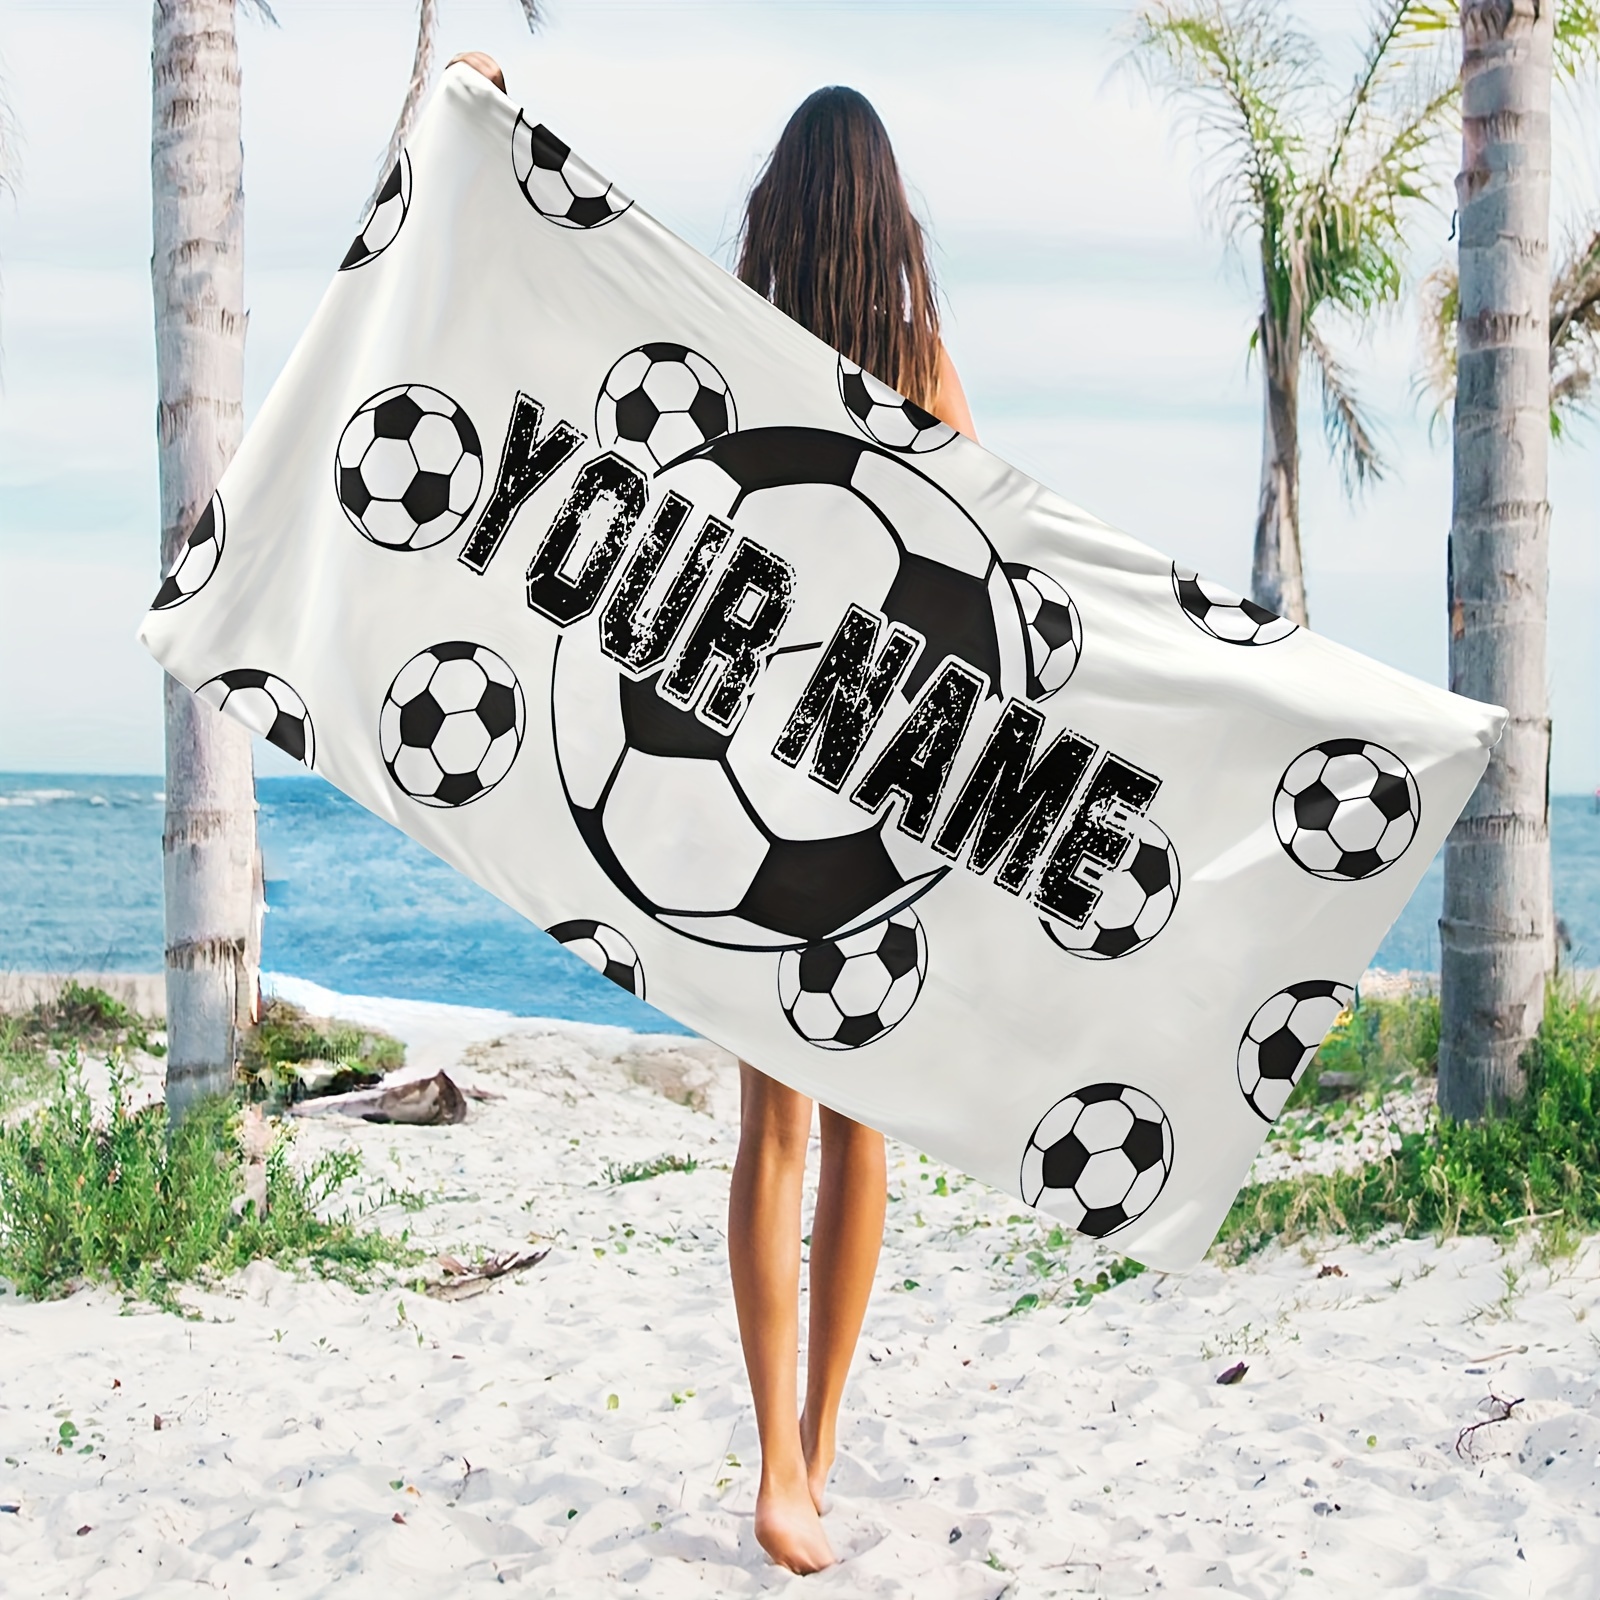 

1pc Name Customized Beach Towel, Football Pattern Personalized Beach Blanket, Super Absorbent & Quick-drying Swimming Towel, Suitable For Beach Swimming Outdoor Camping Travel, Ideal Beach Essentials